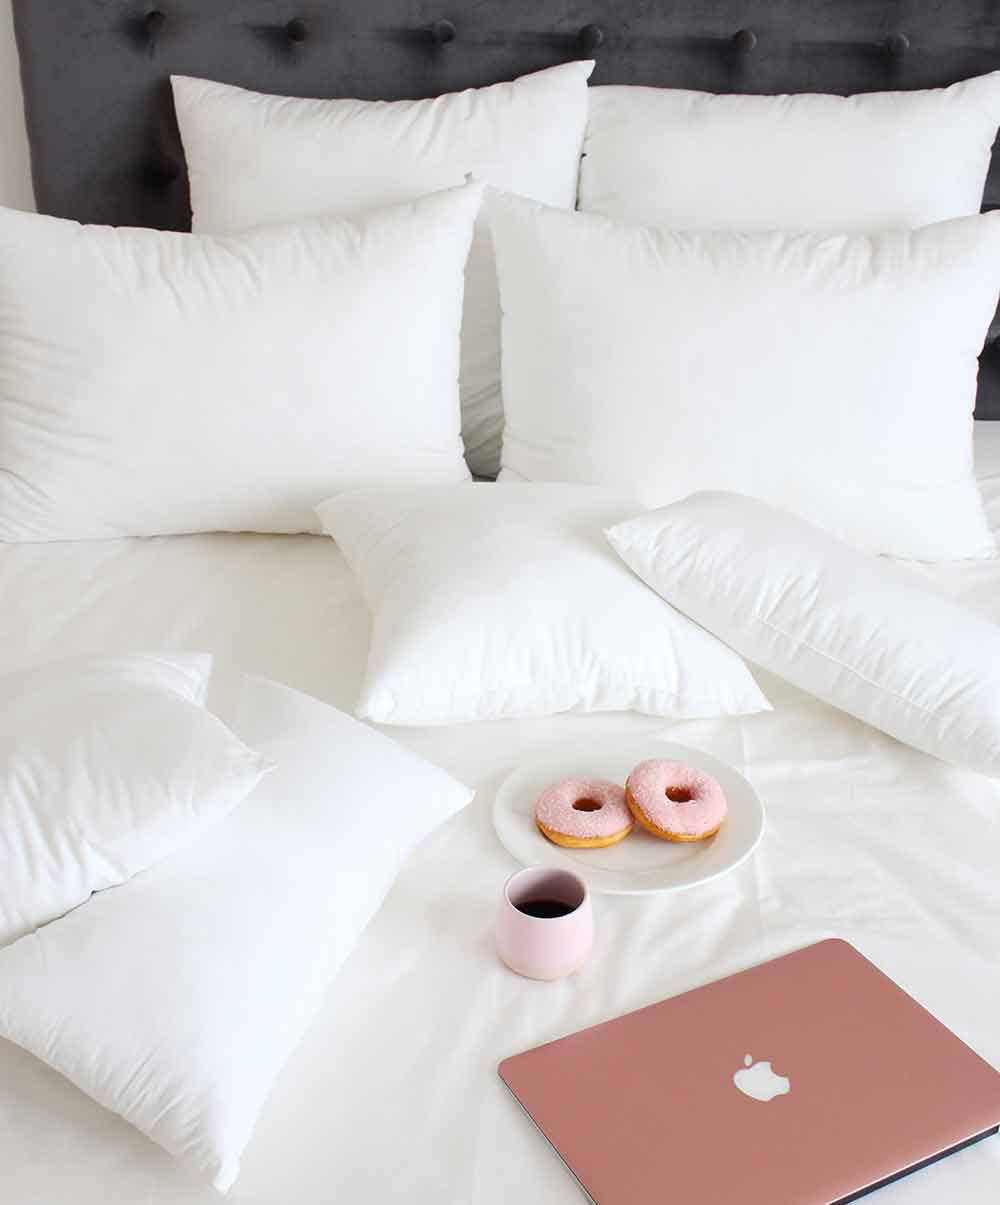 How to Have the Perfect Duvet Day